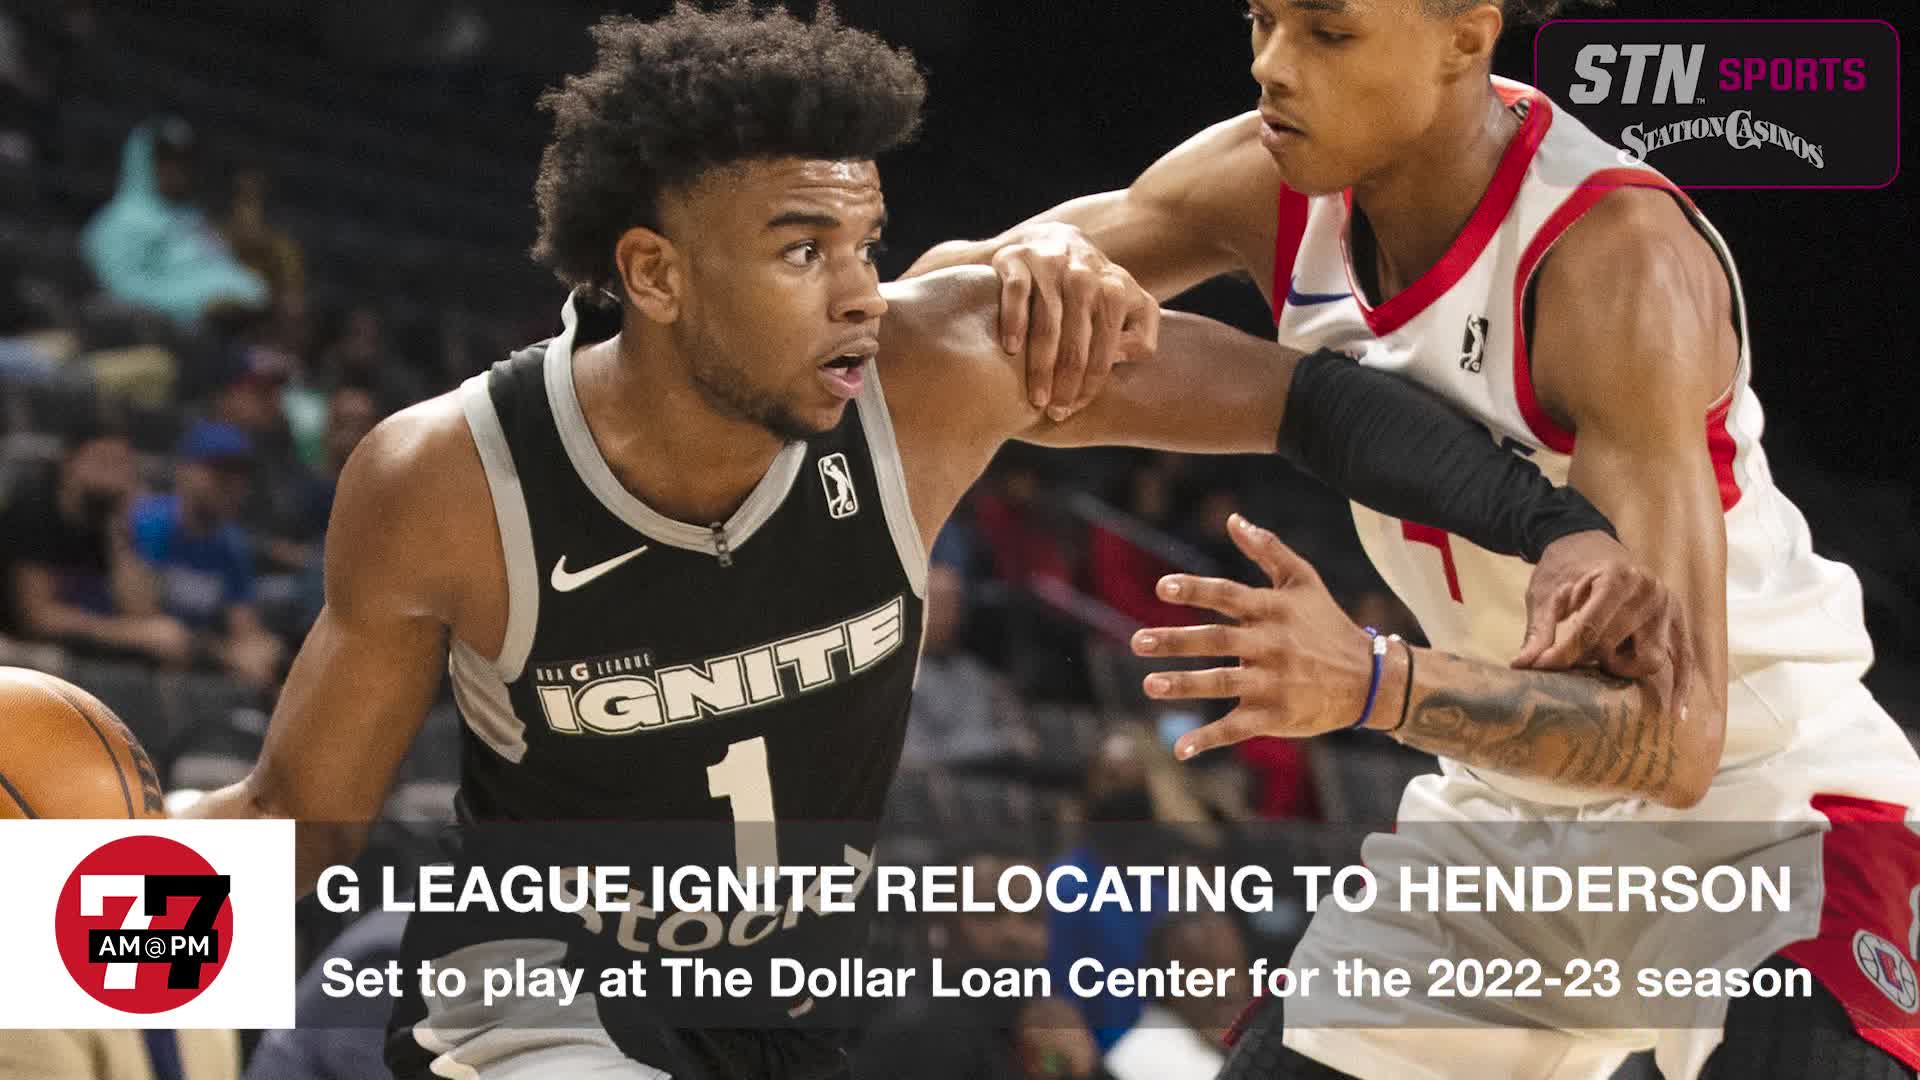 G League Ignite relocating to Henderson